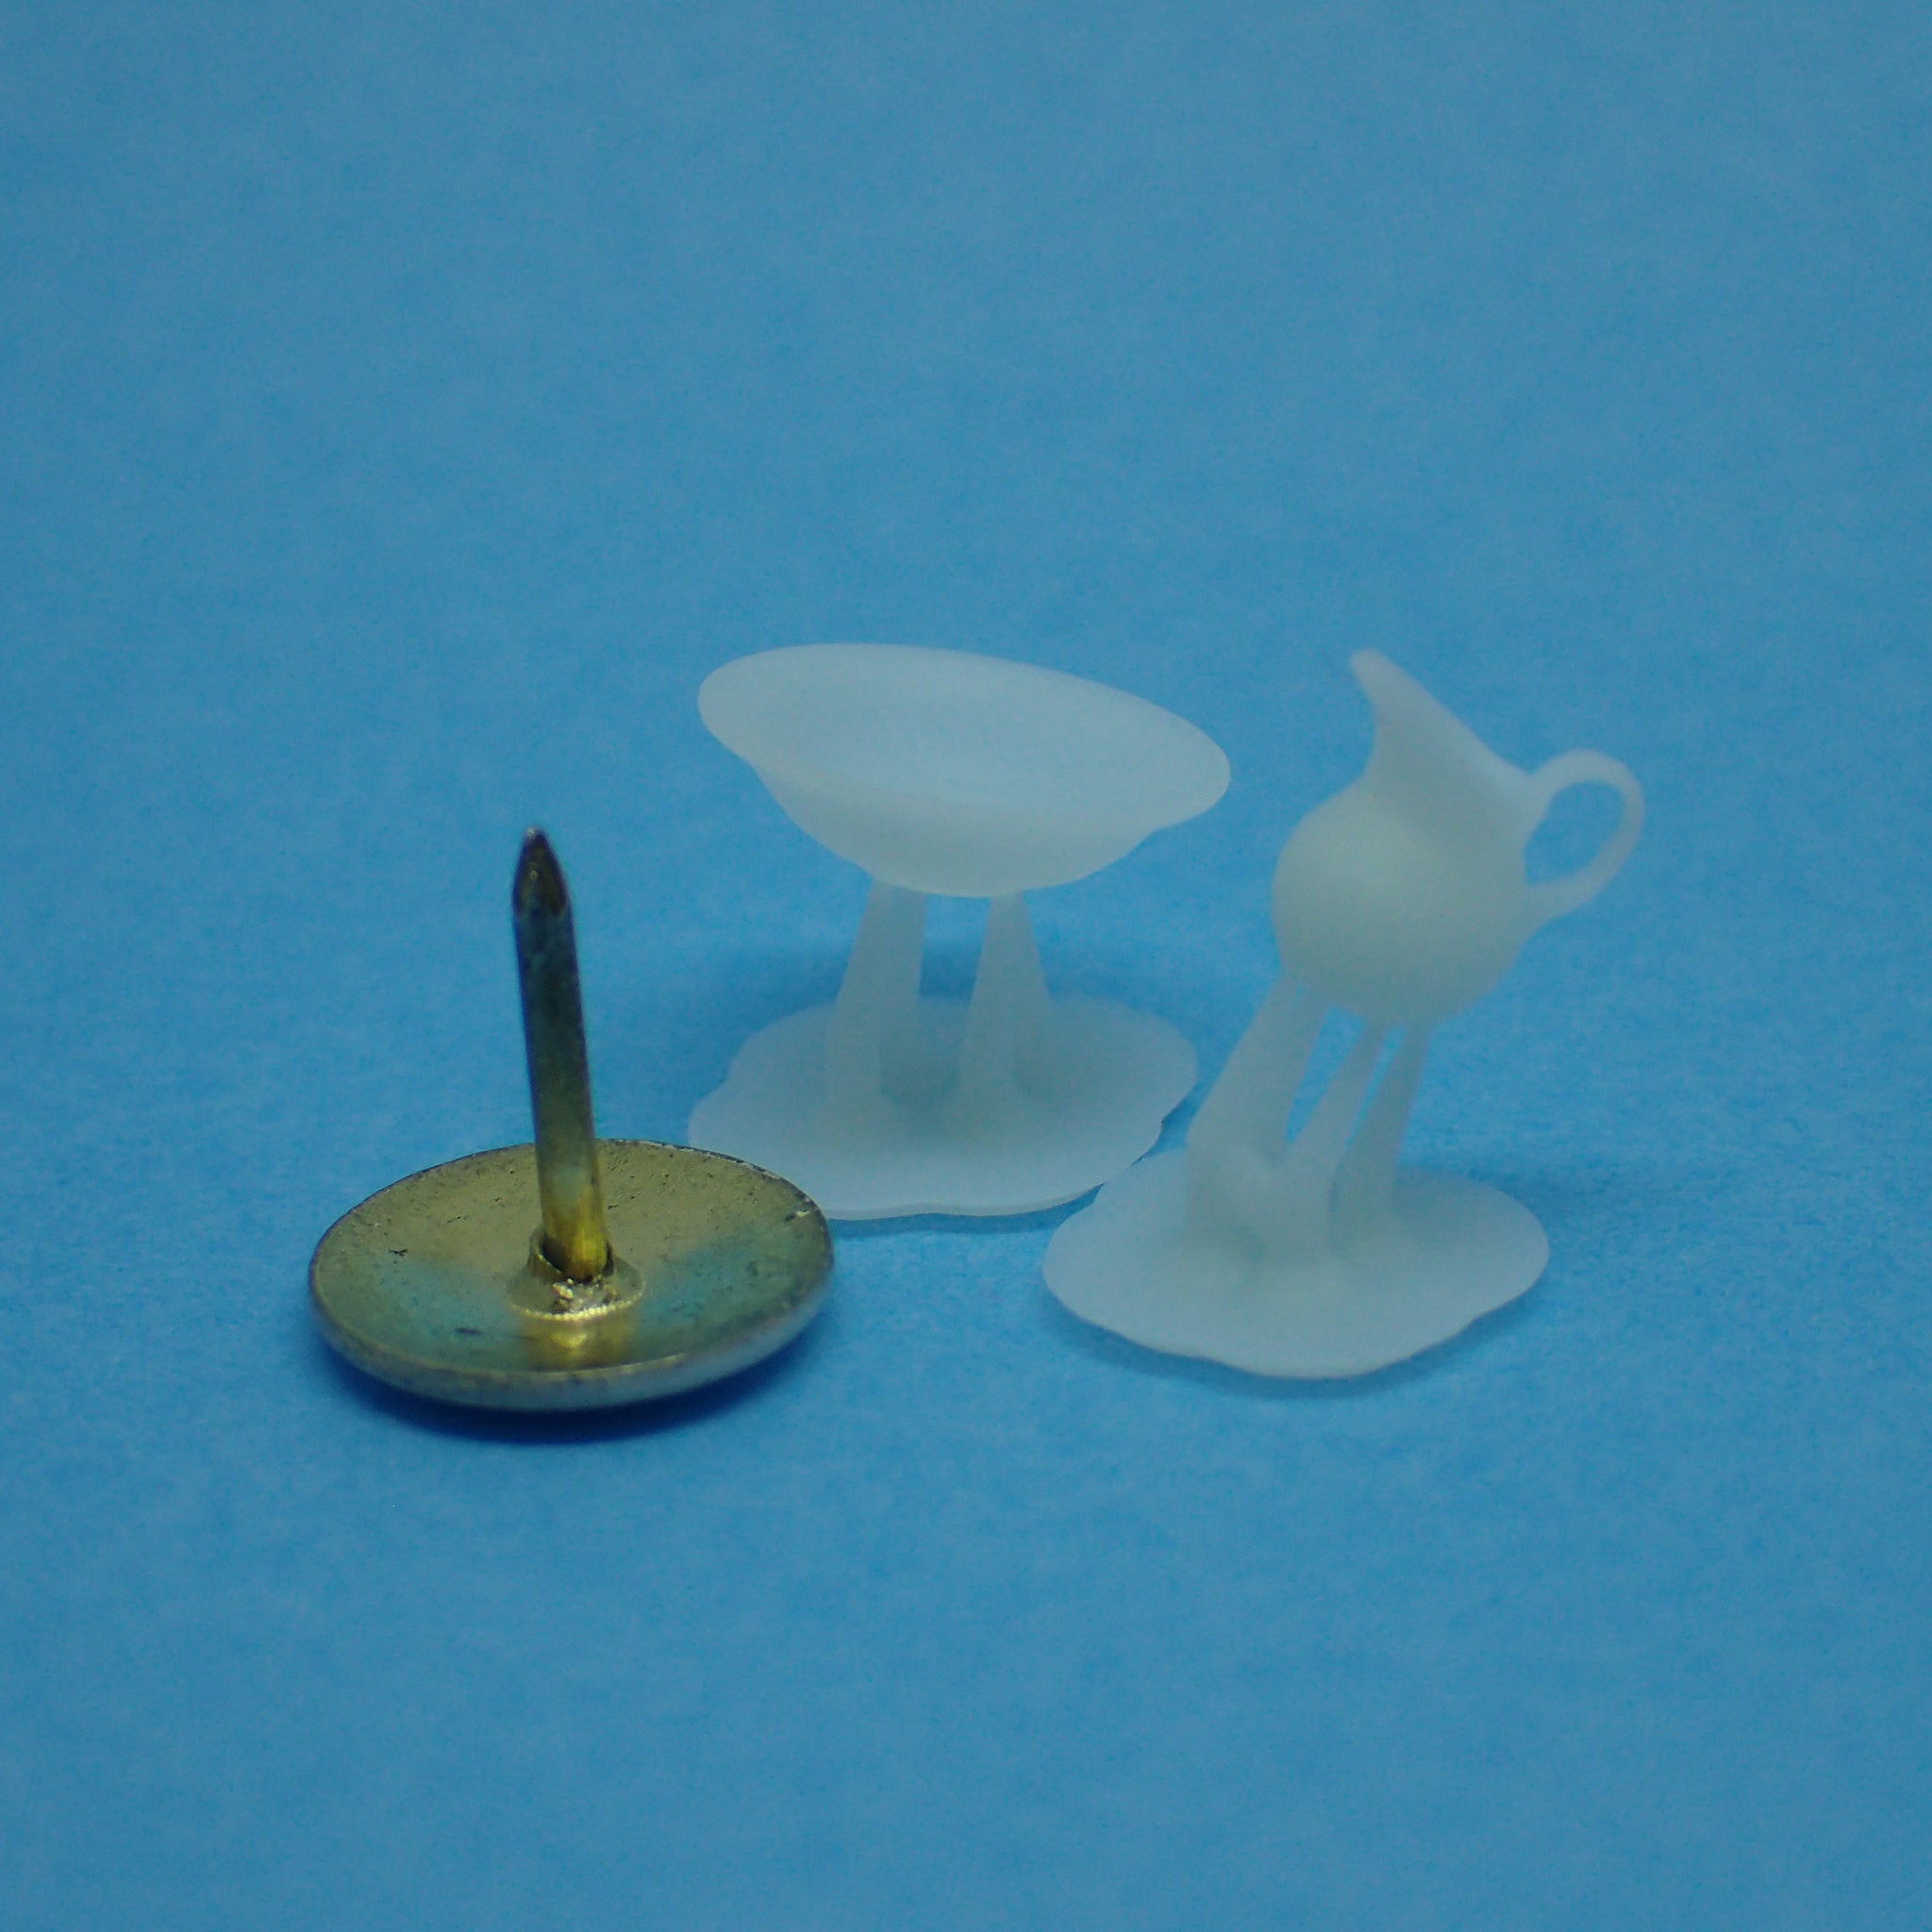 Ewer and basin set, 1/48th scale